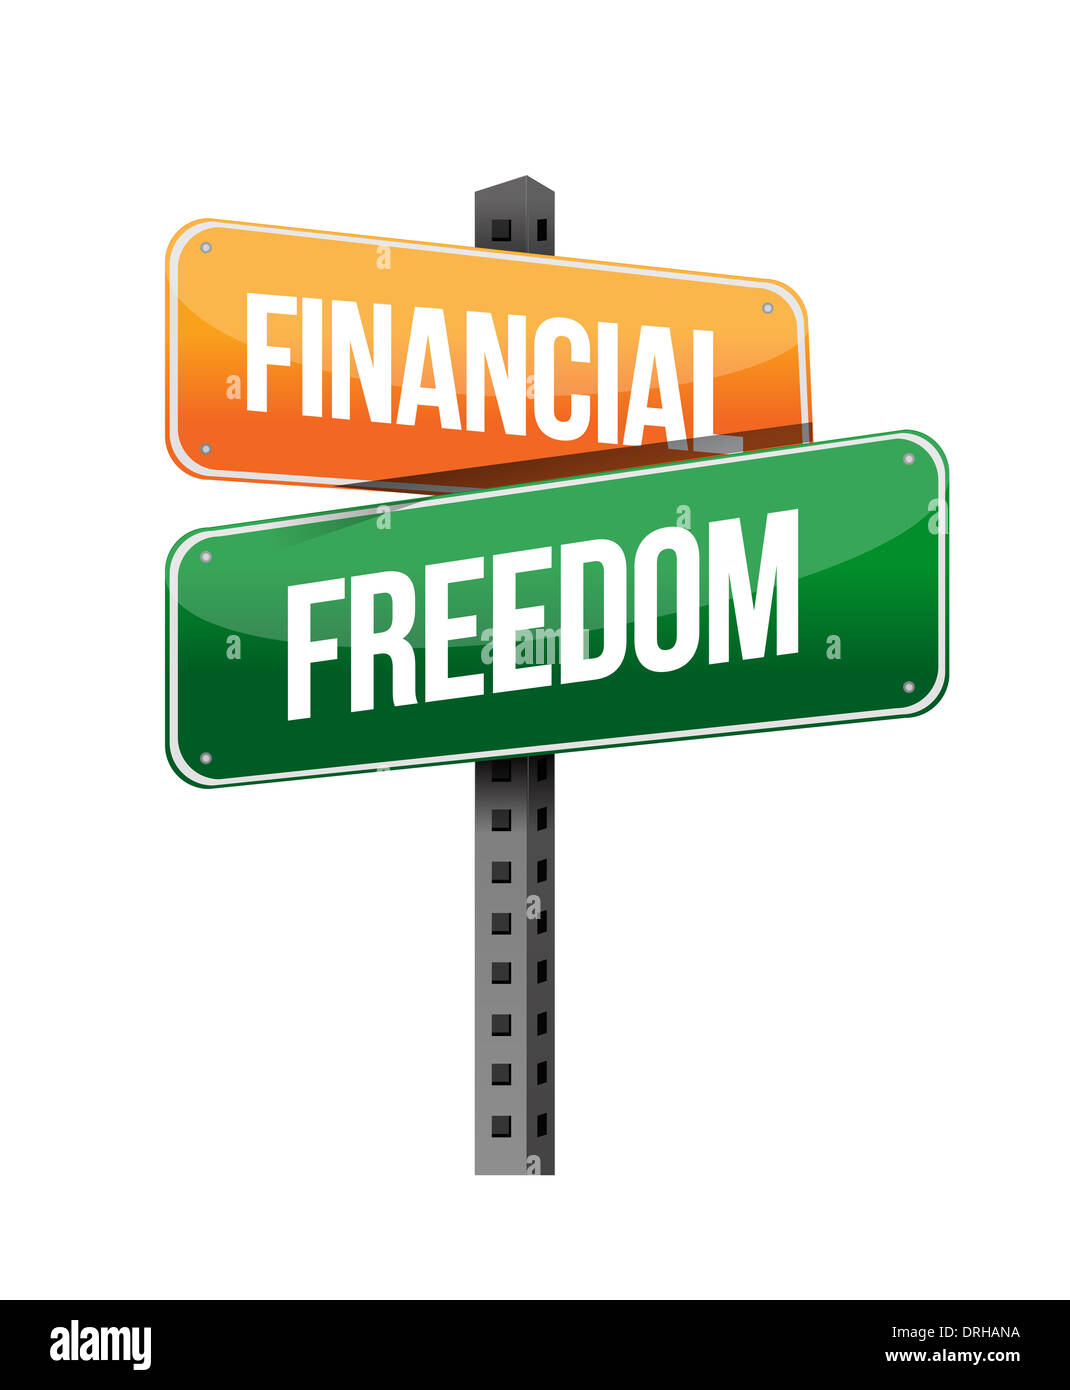 financial freedom illustration design over a white background Stock Photo